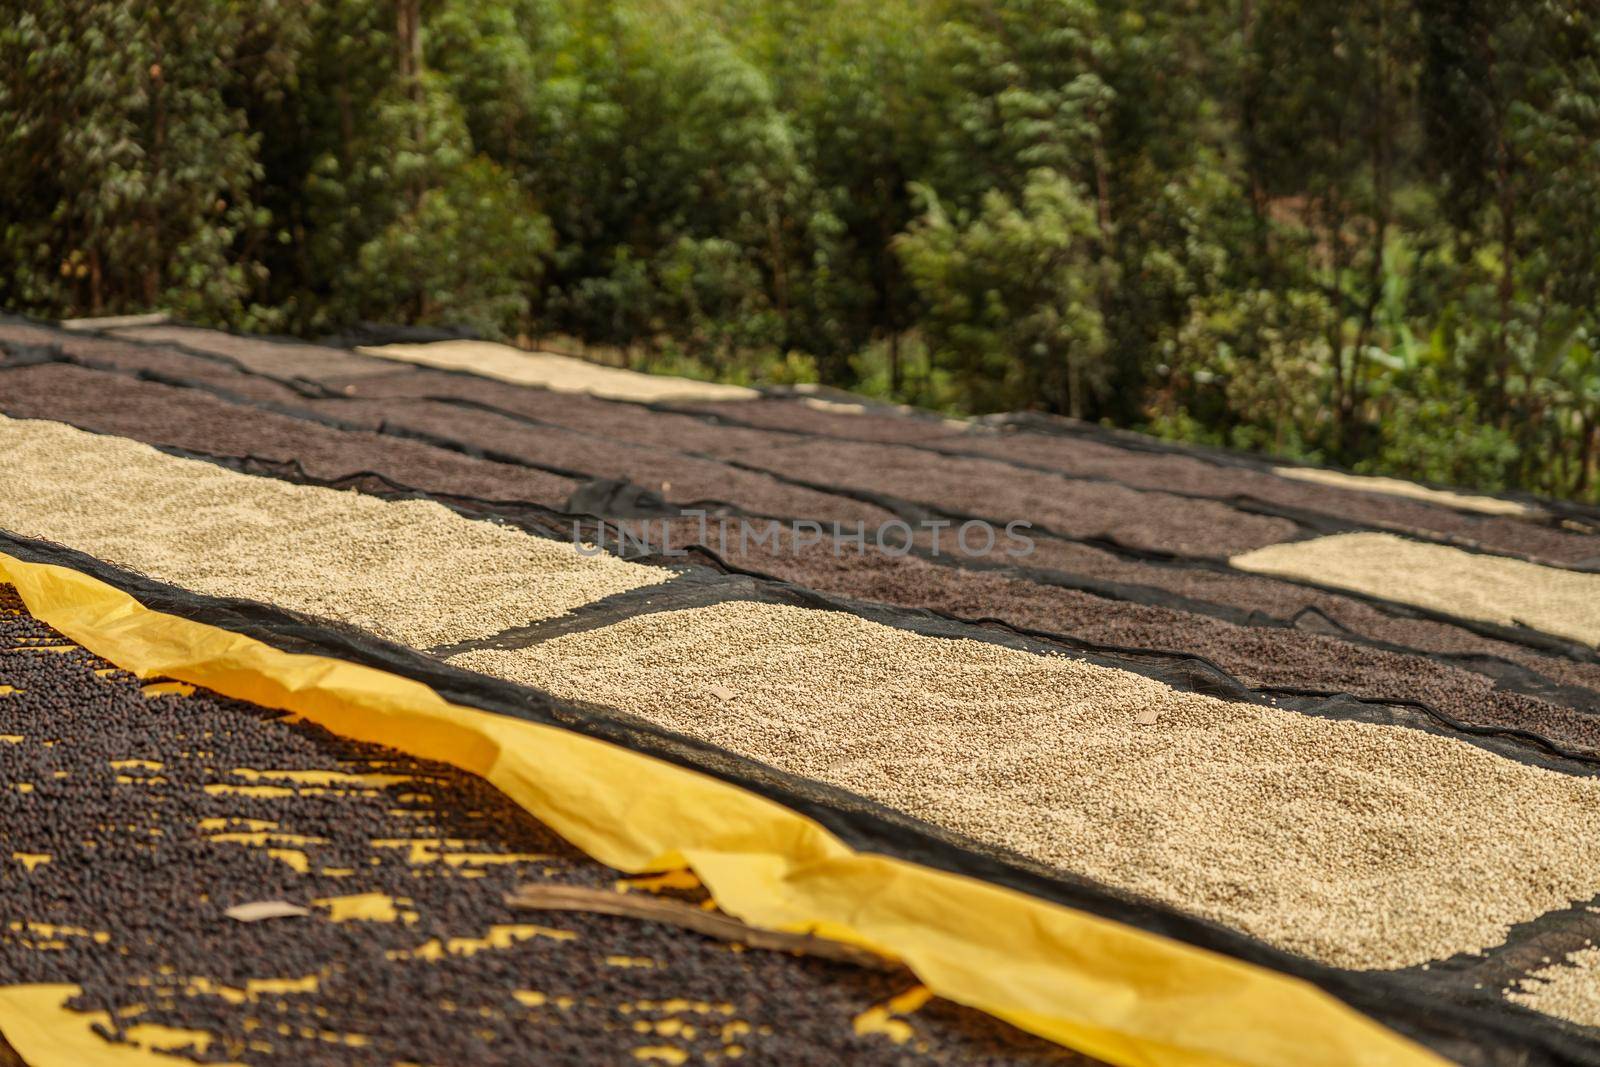 Top view of different stages of drying coffee beans outdoors on a farm in Africa region